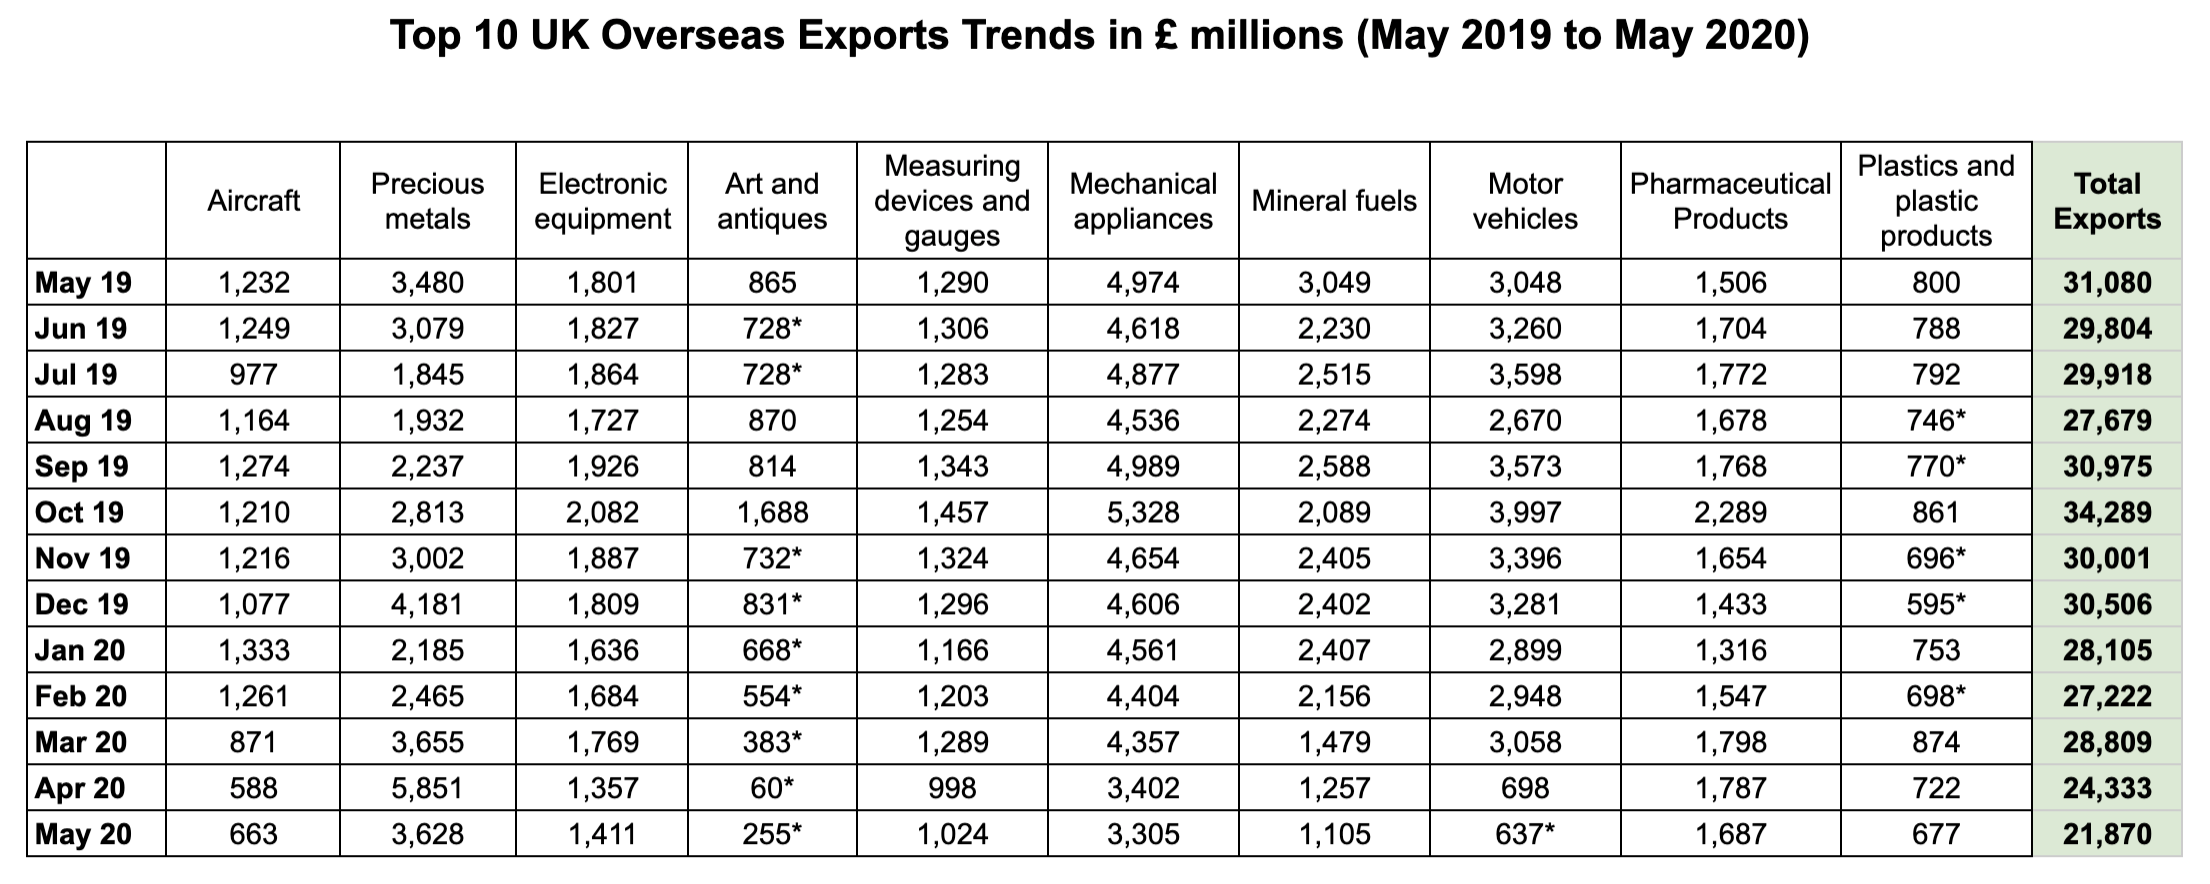 Top 10 UK Overseas Exports Trends in £ millions (May 2019 to May 2020)